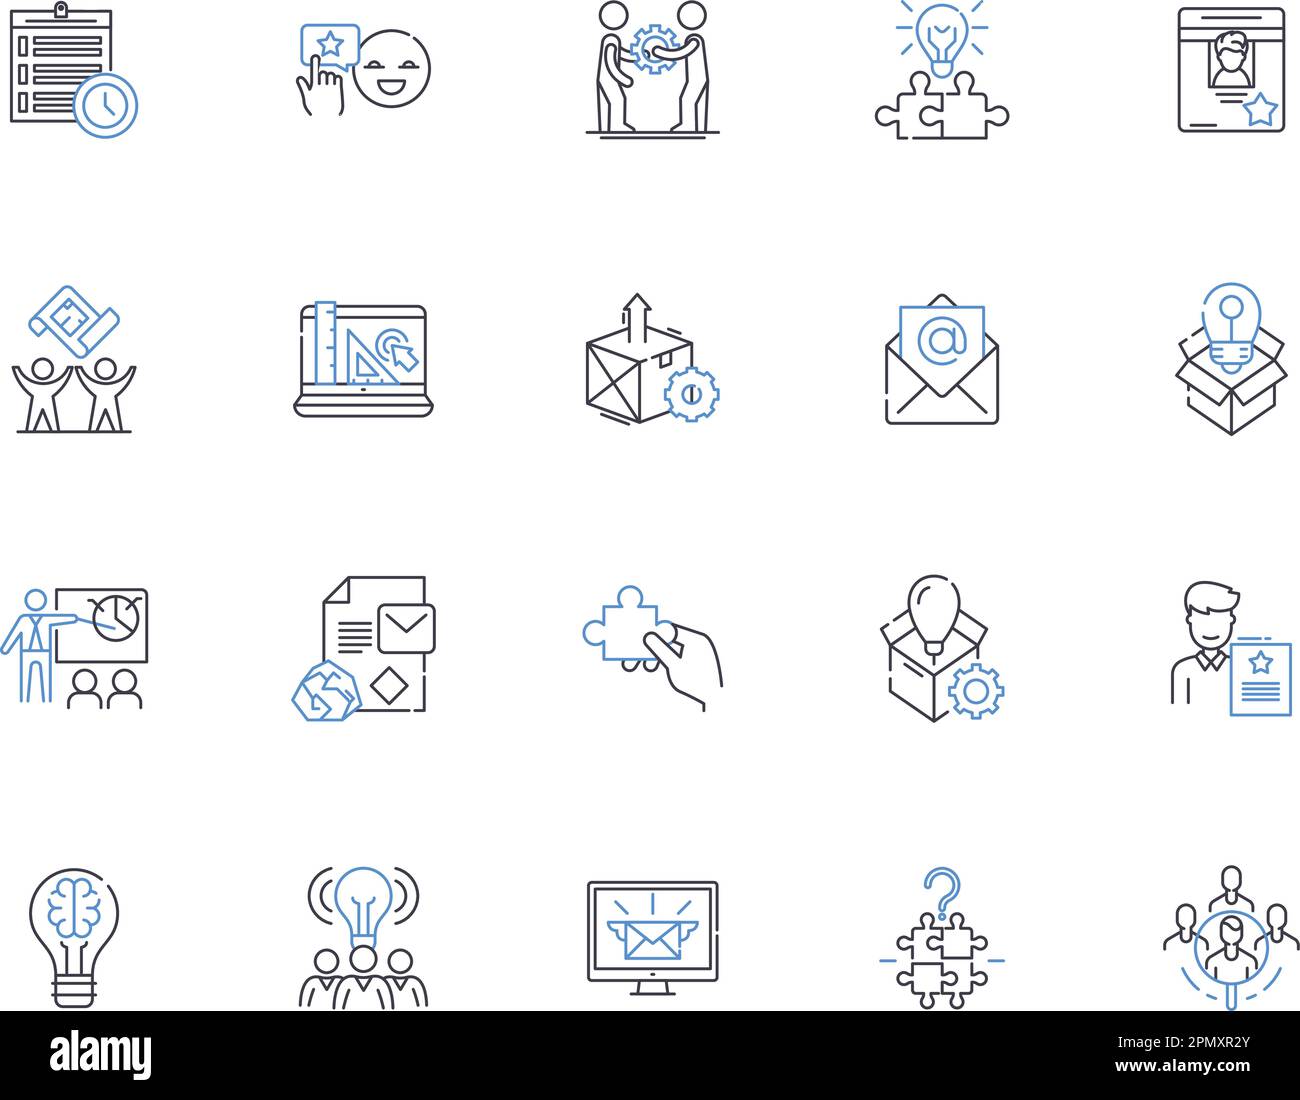 Marketing strategy outline icons collection. Brand, Promotion, Advertising, Targeting, Positioning, Segmentation, Redesign vector and illustration Stock Vector